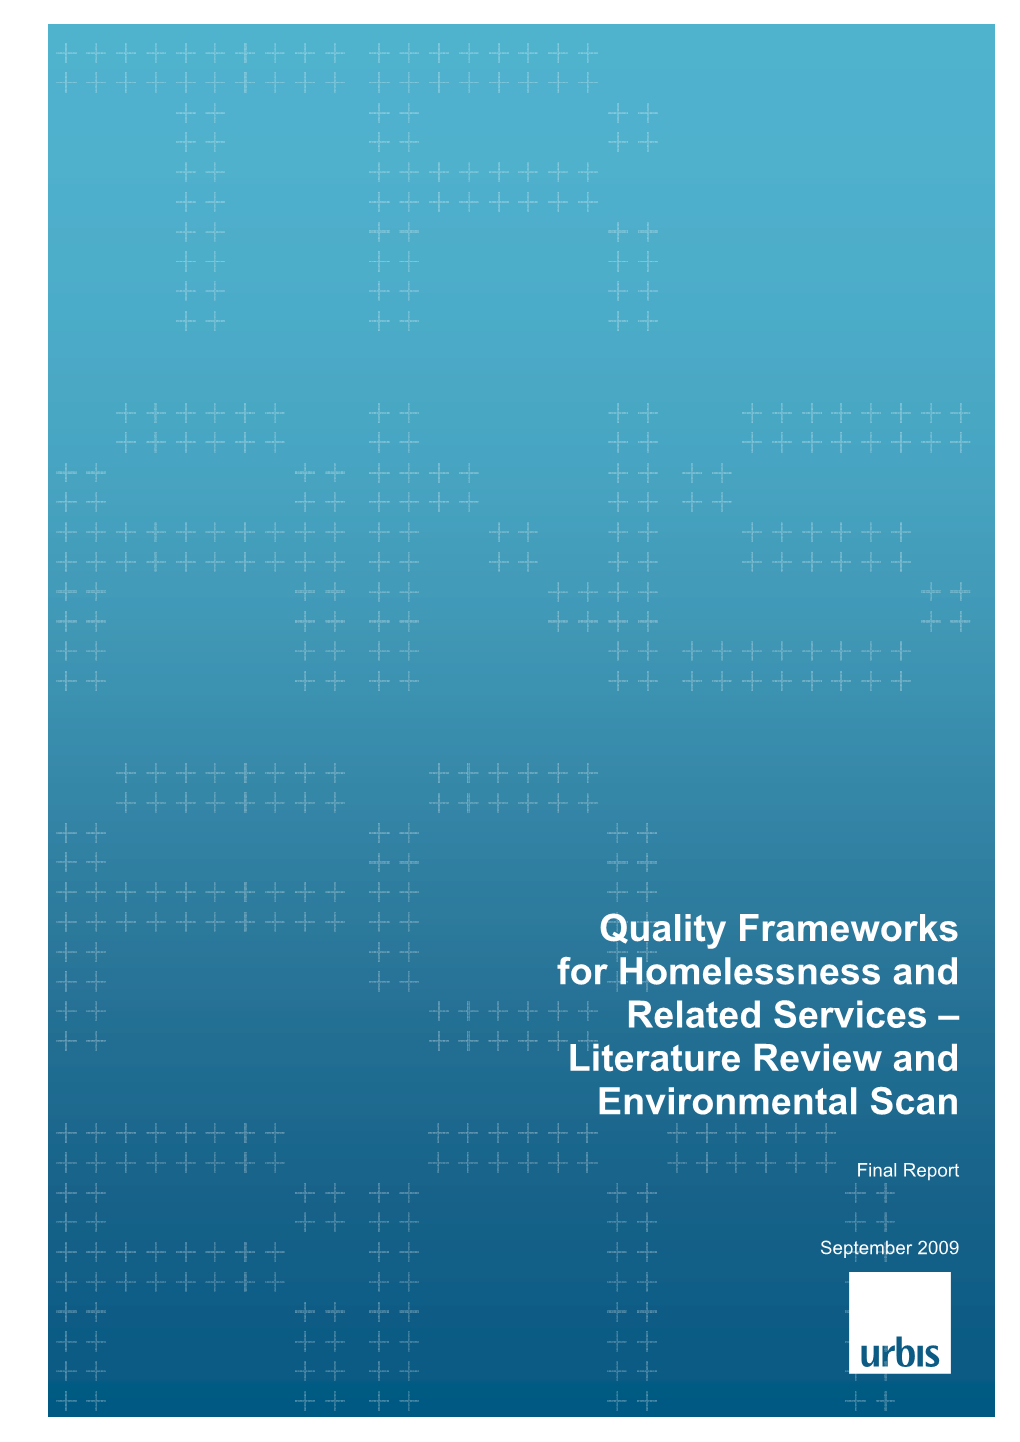 Quality Frameworks for Homelessness and Related Services – Literature Review and Environmental Scan